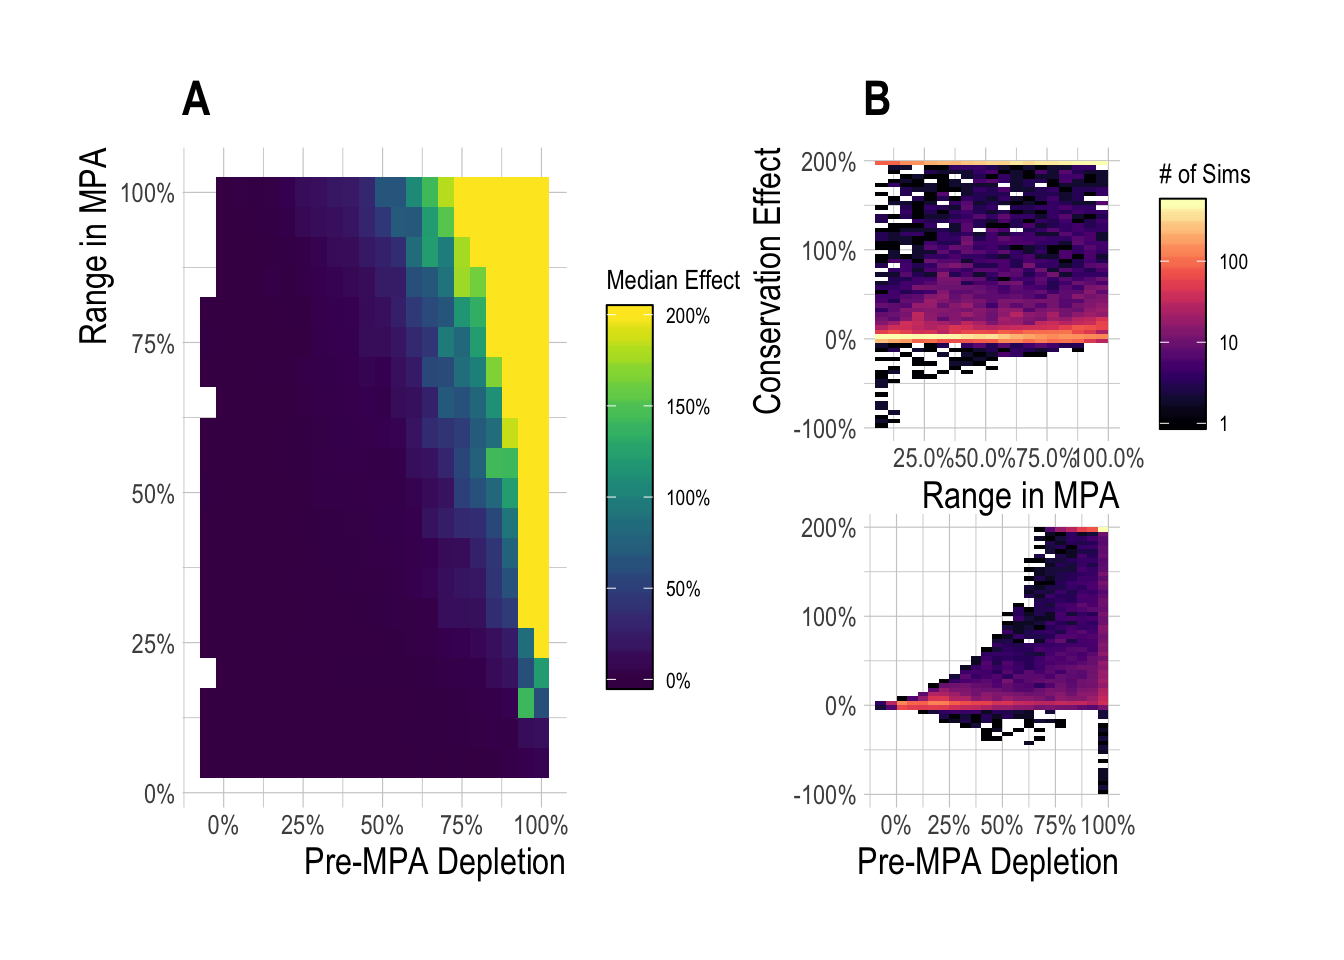 Median (A) and range of (B) regional MPA conservation effect after 15 years of protection across a range of pre-MPA depletions and MPA sizes